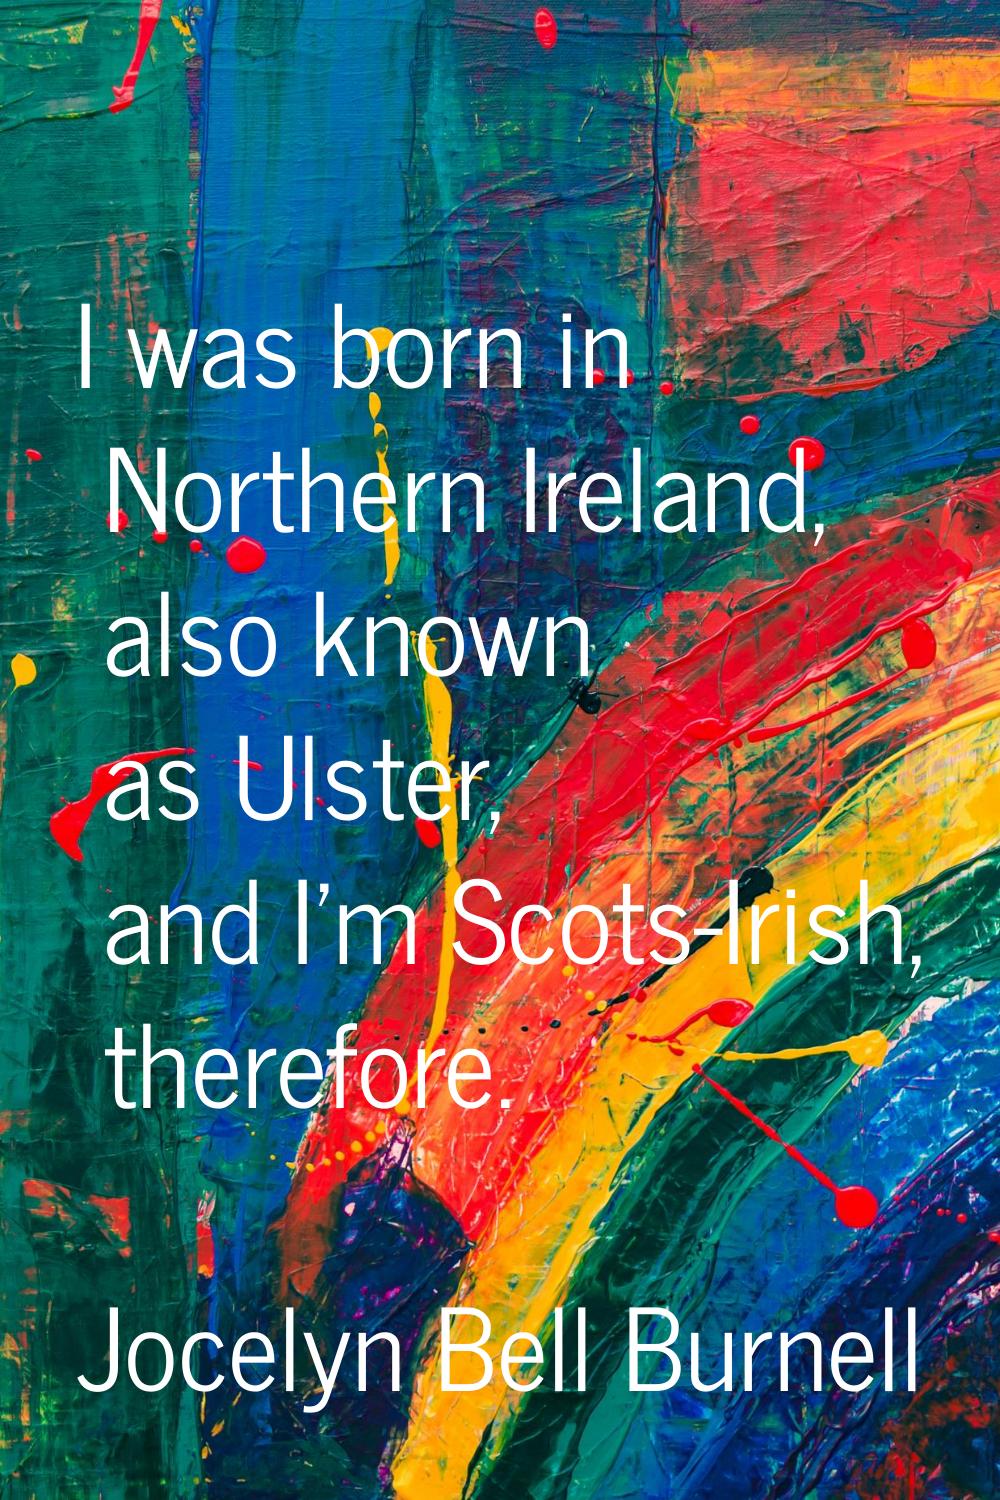 I was born in Northern Ireland, also known as Ulster, and I'm Scots-Irish, therefore.